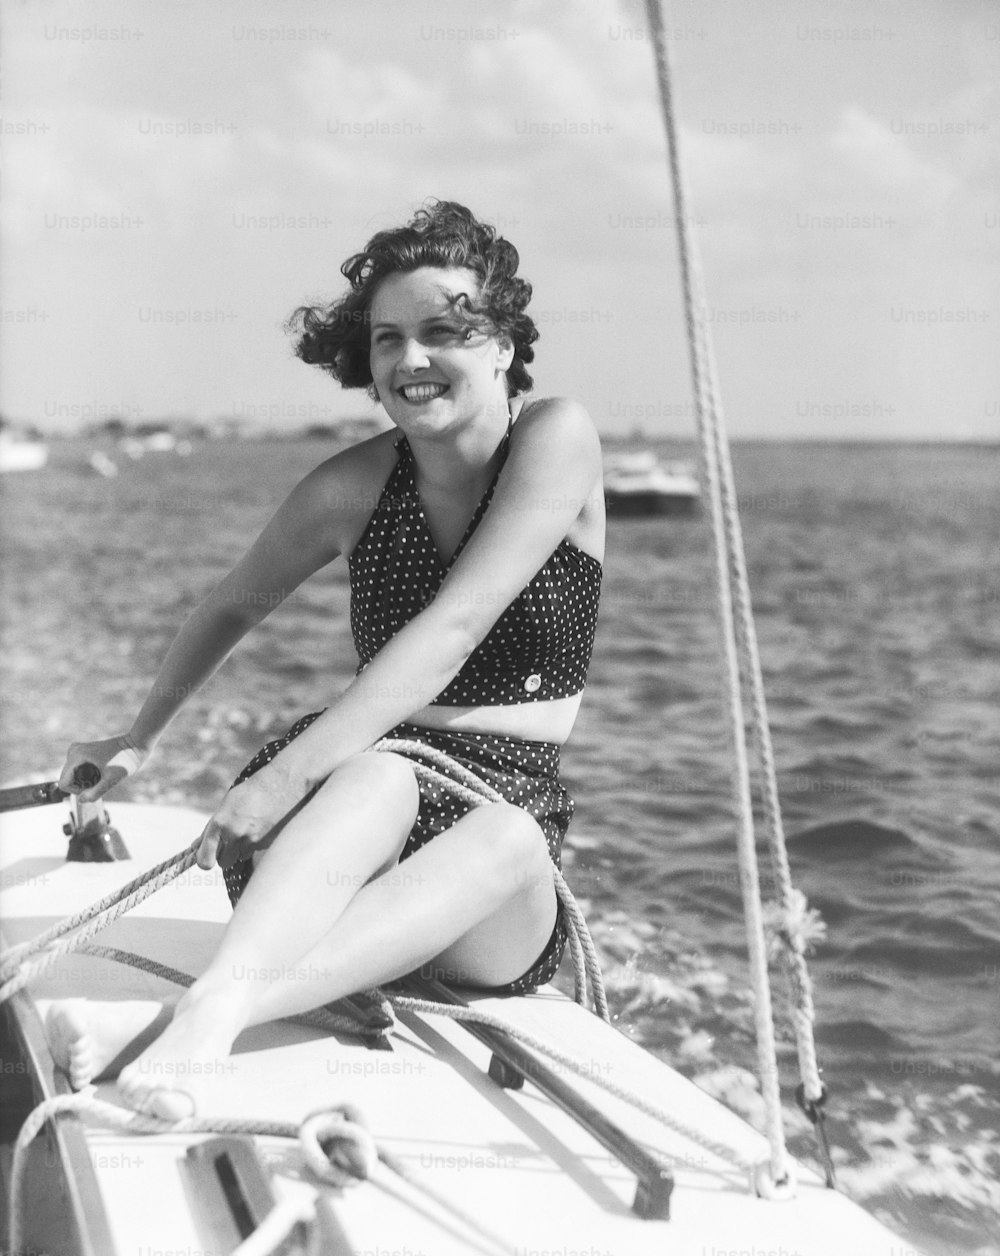 UNITED STATES - CIRCA 1930s:  Woman in swimsuit, on sailing boat, holding rope, smiling.